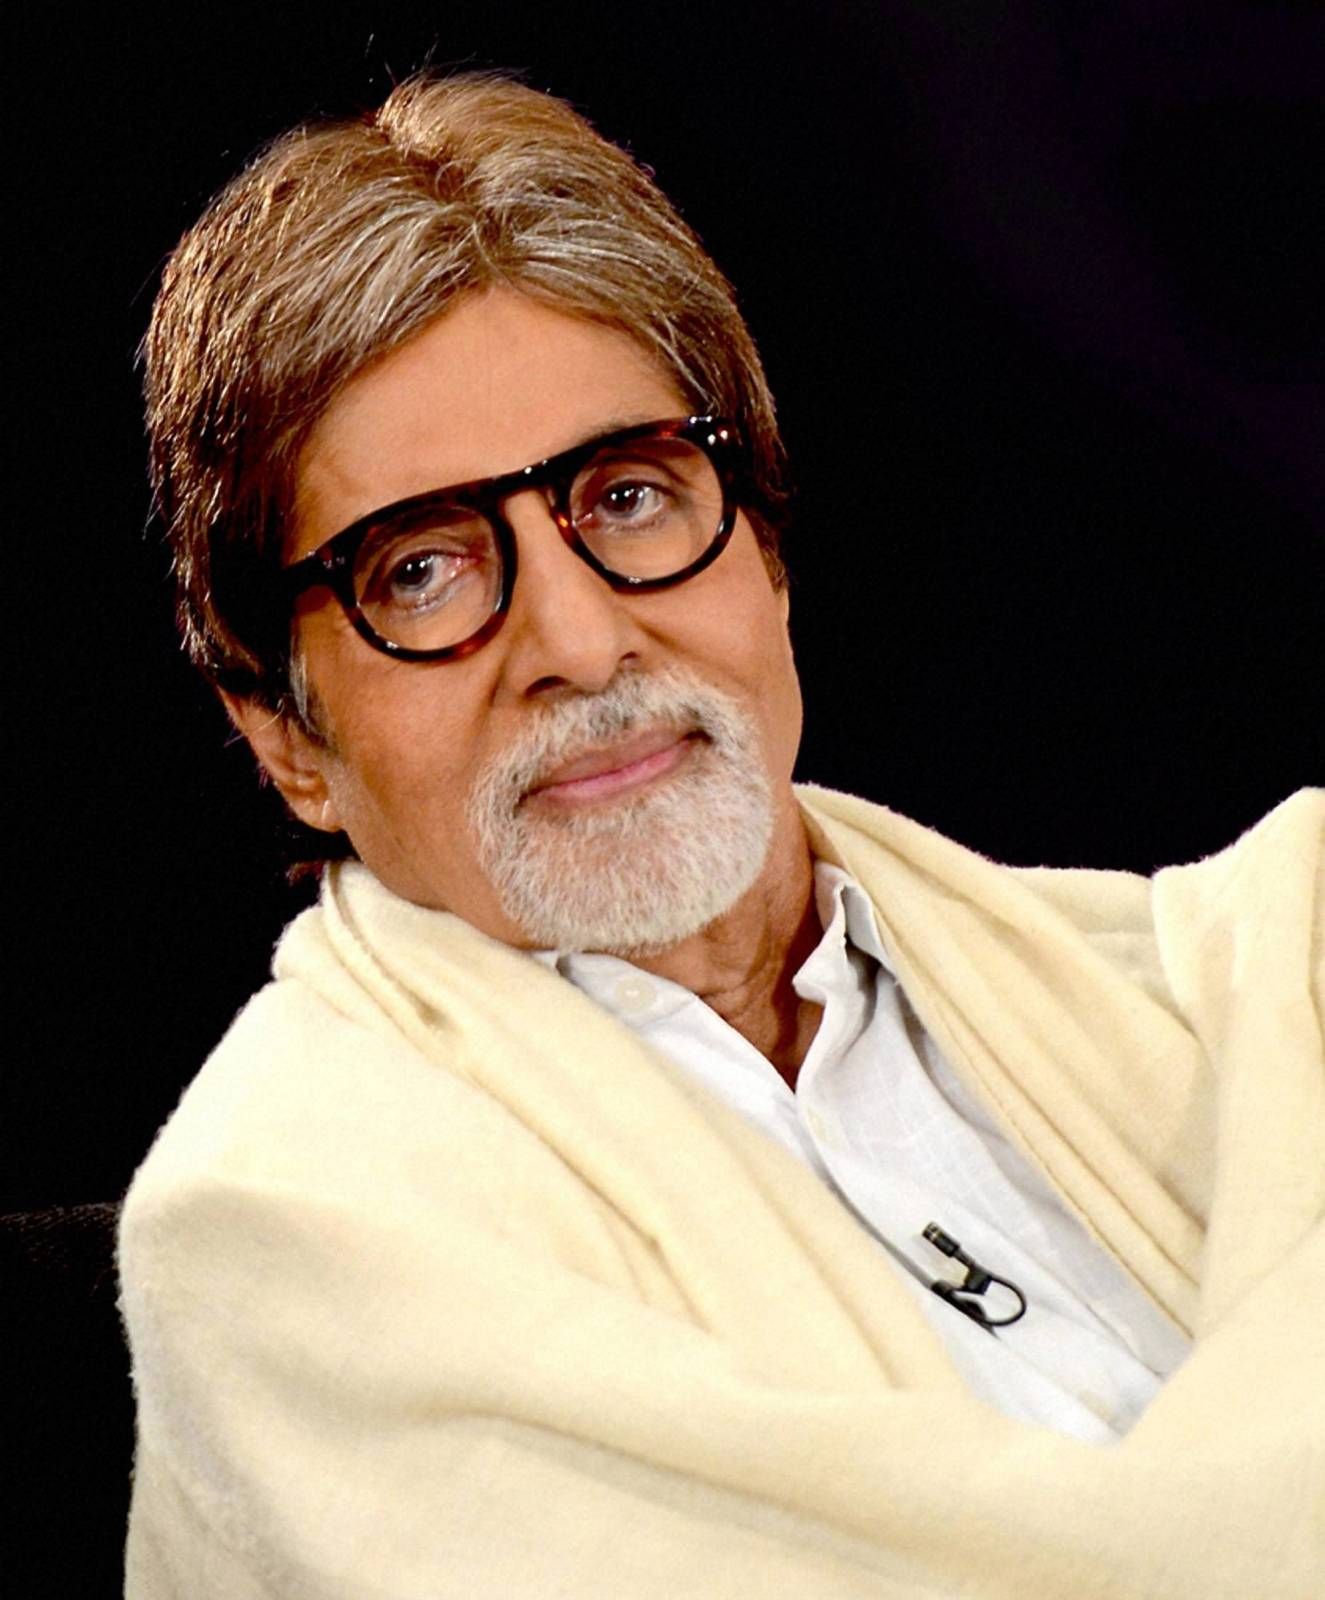 Amitabh Bachchan has been asked to head an Indian film festival in Brazil